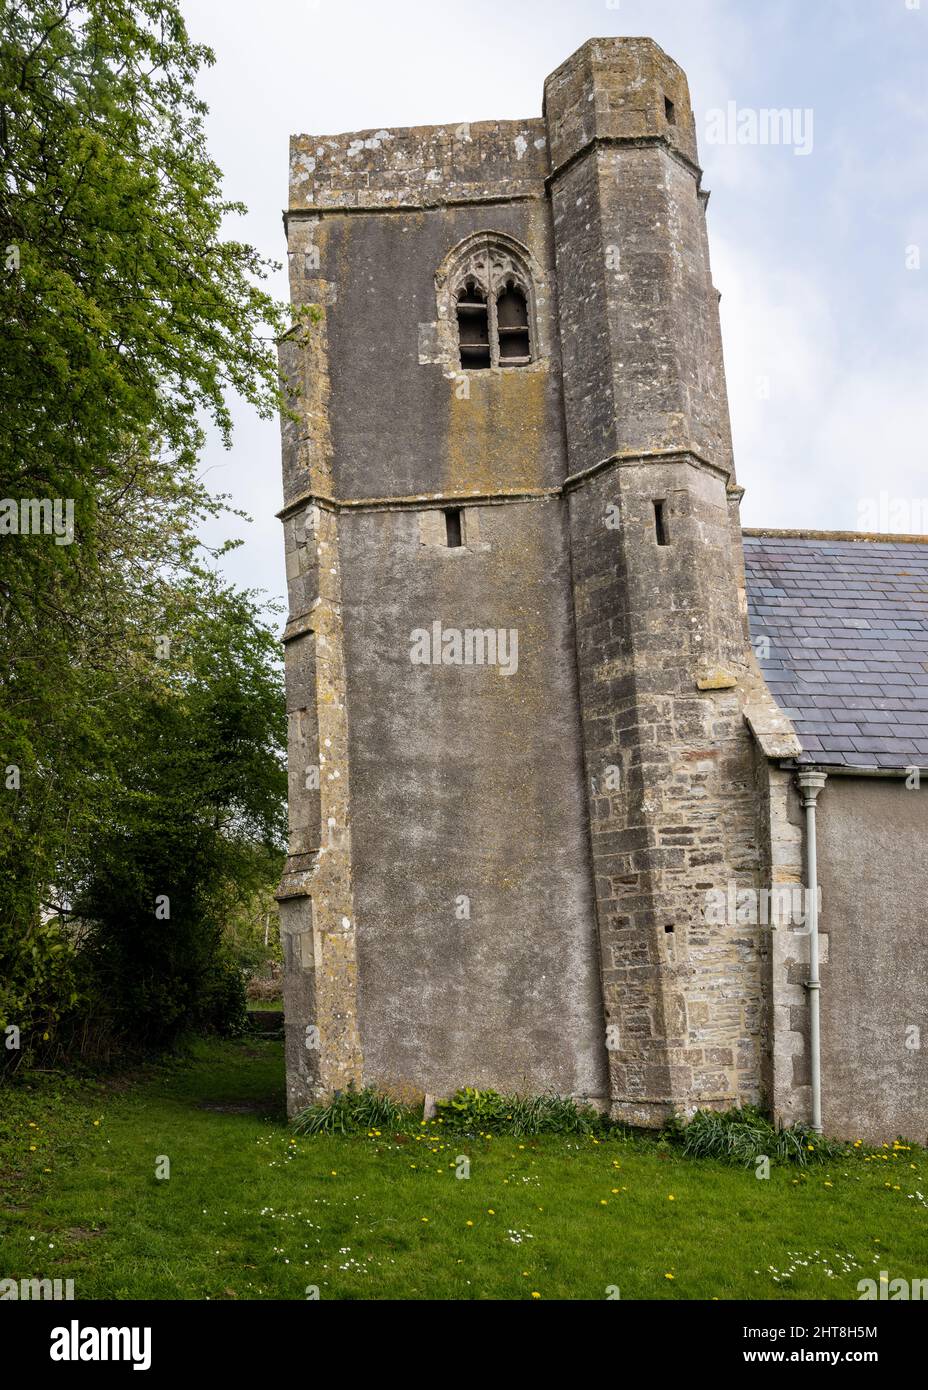 The mediaeval Church of the Holy Saviour in Puxton, Somerset, with its distinctive leaning tower. Stock Photo